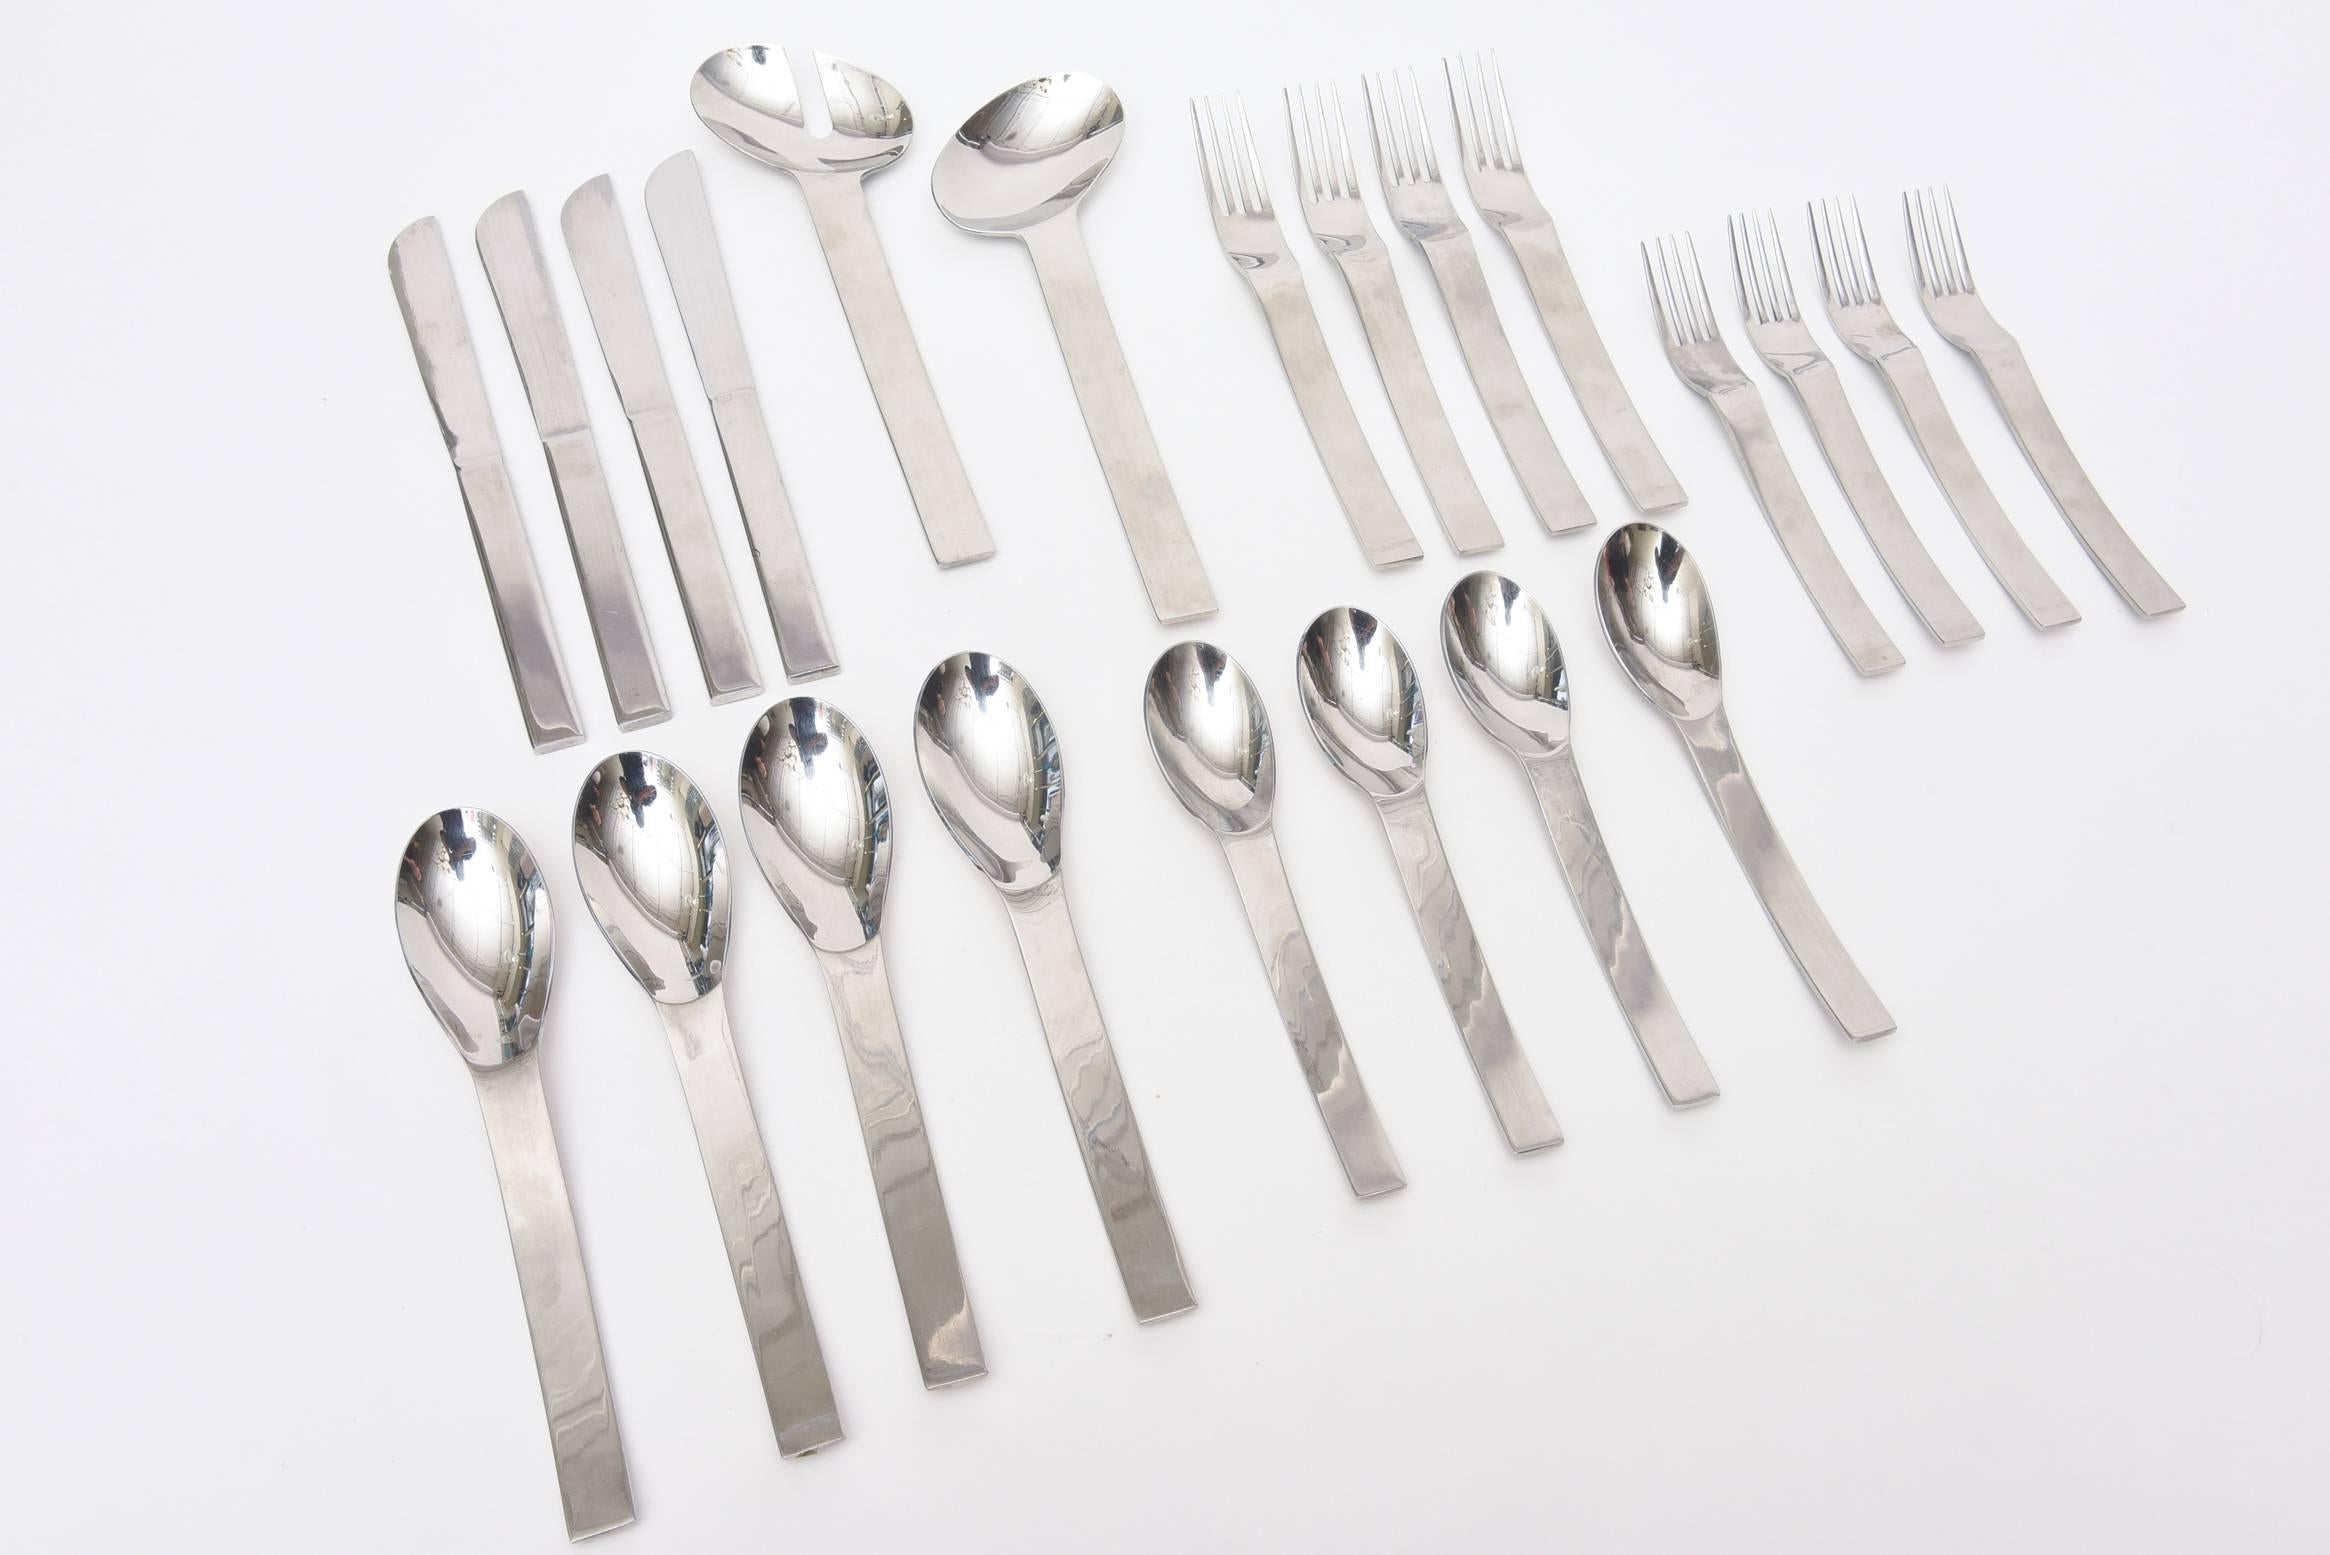 These vintage modernist stainless steel table settings is signed. It is from the late 1960s-early 1970s and was produced in Korea by Y. Kono Vignelli for Sasaki. There are 4 complete place setting s plus a few serving pieces for salad. There are 20